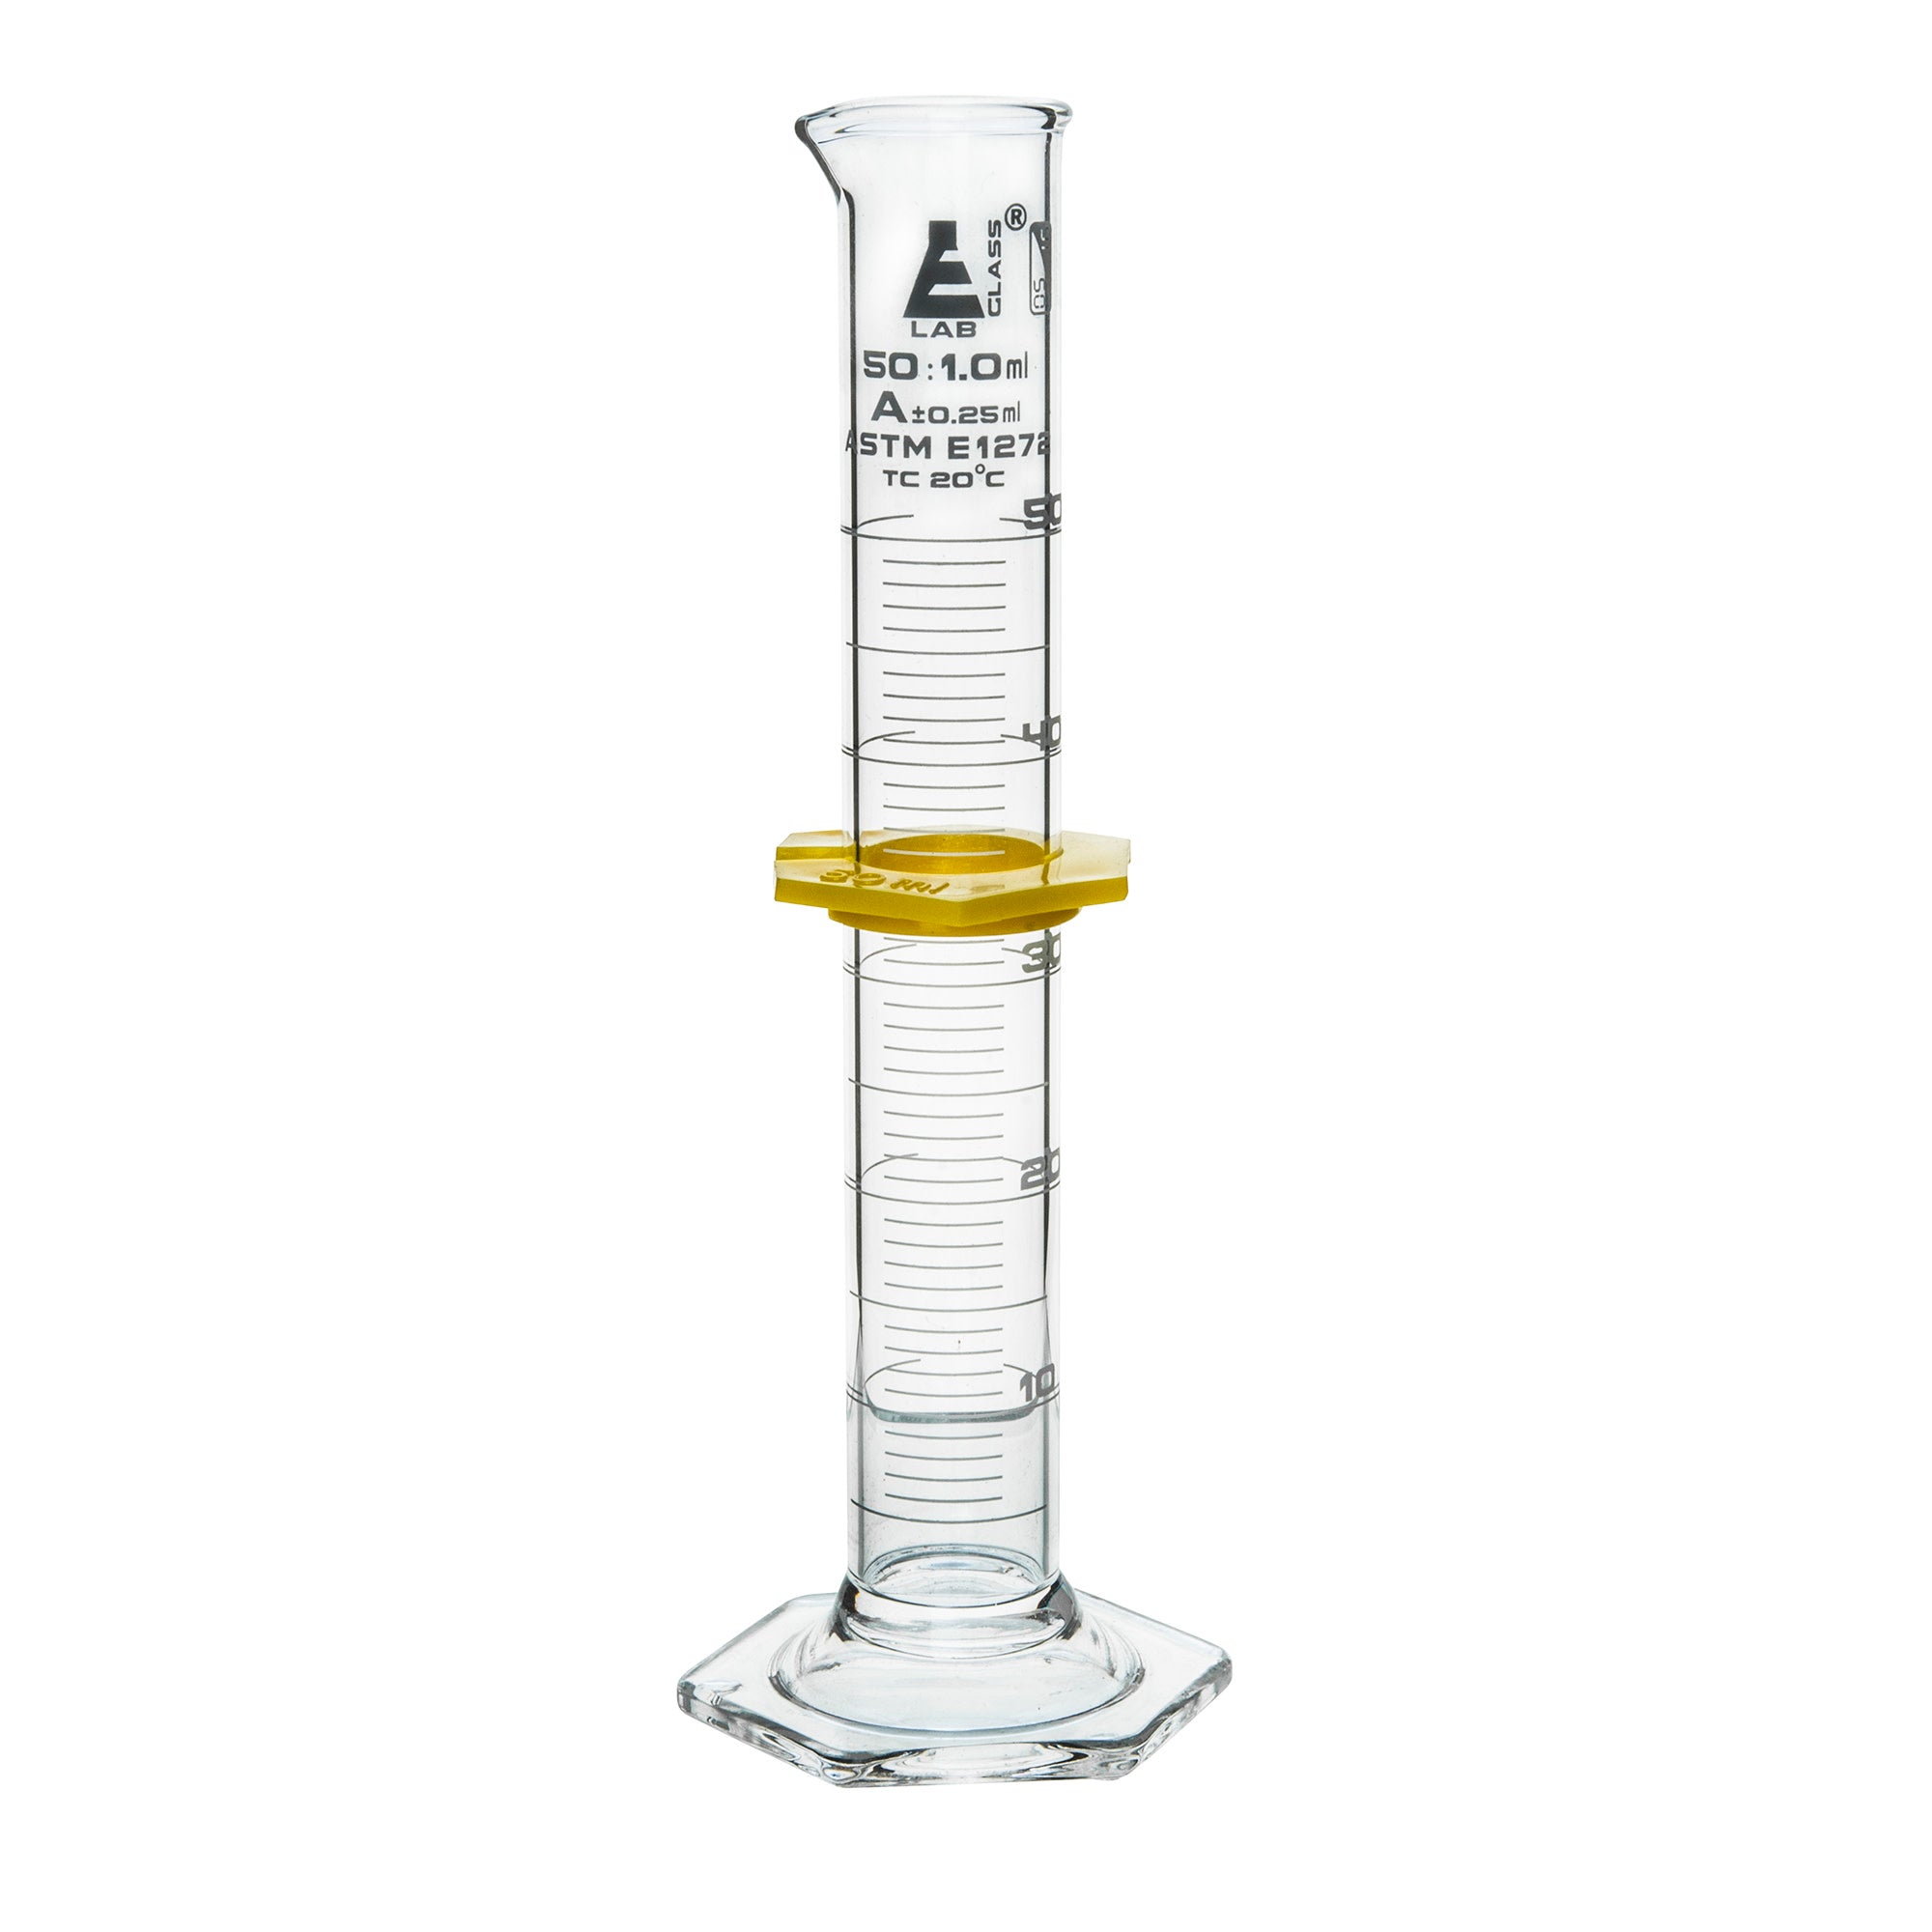 Borosilicate Glass Graduated Cylinder with Guard, 50 ml, 1.0 ml Graduation, Class A, ASTM, Autoclavable